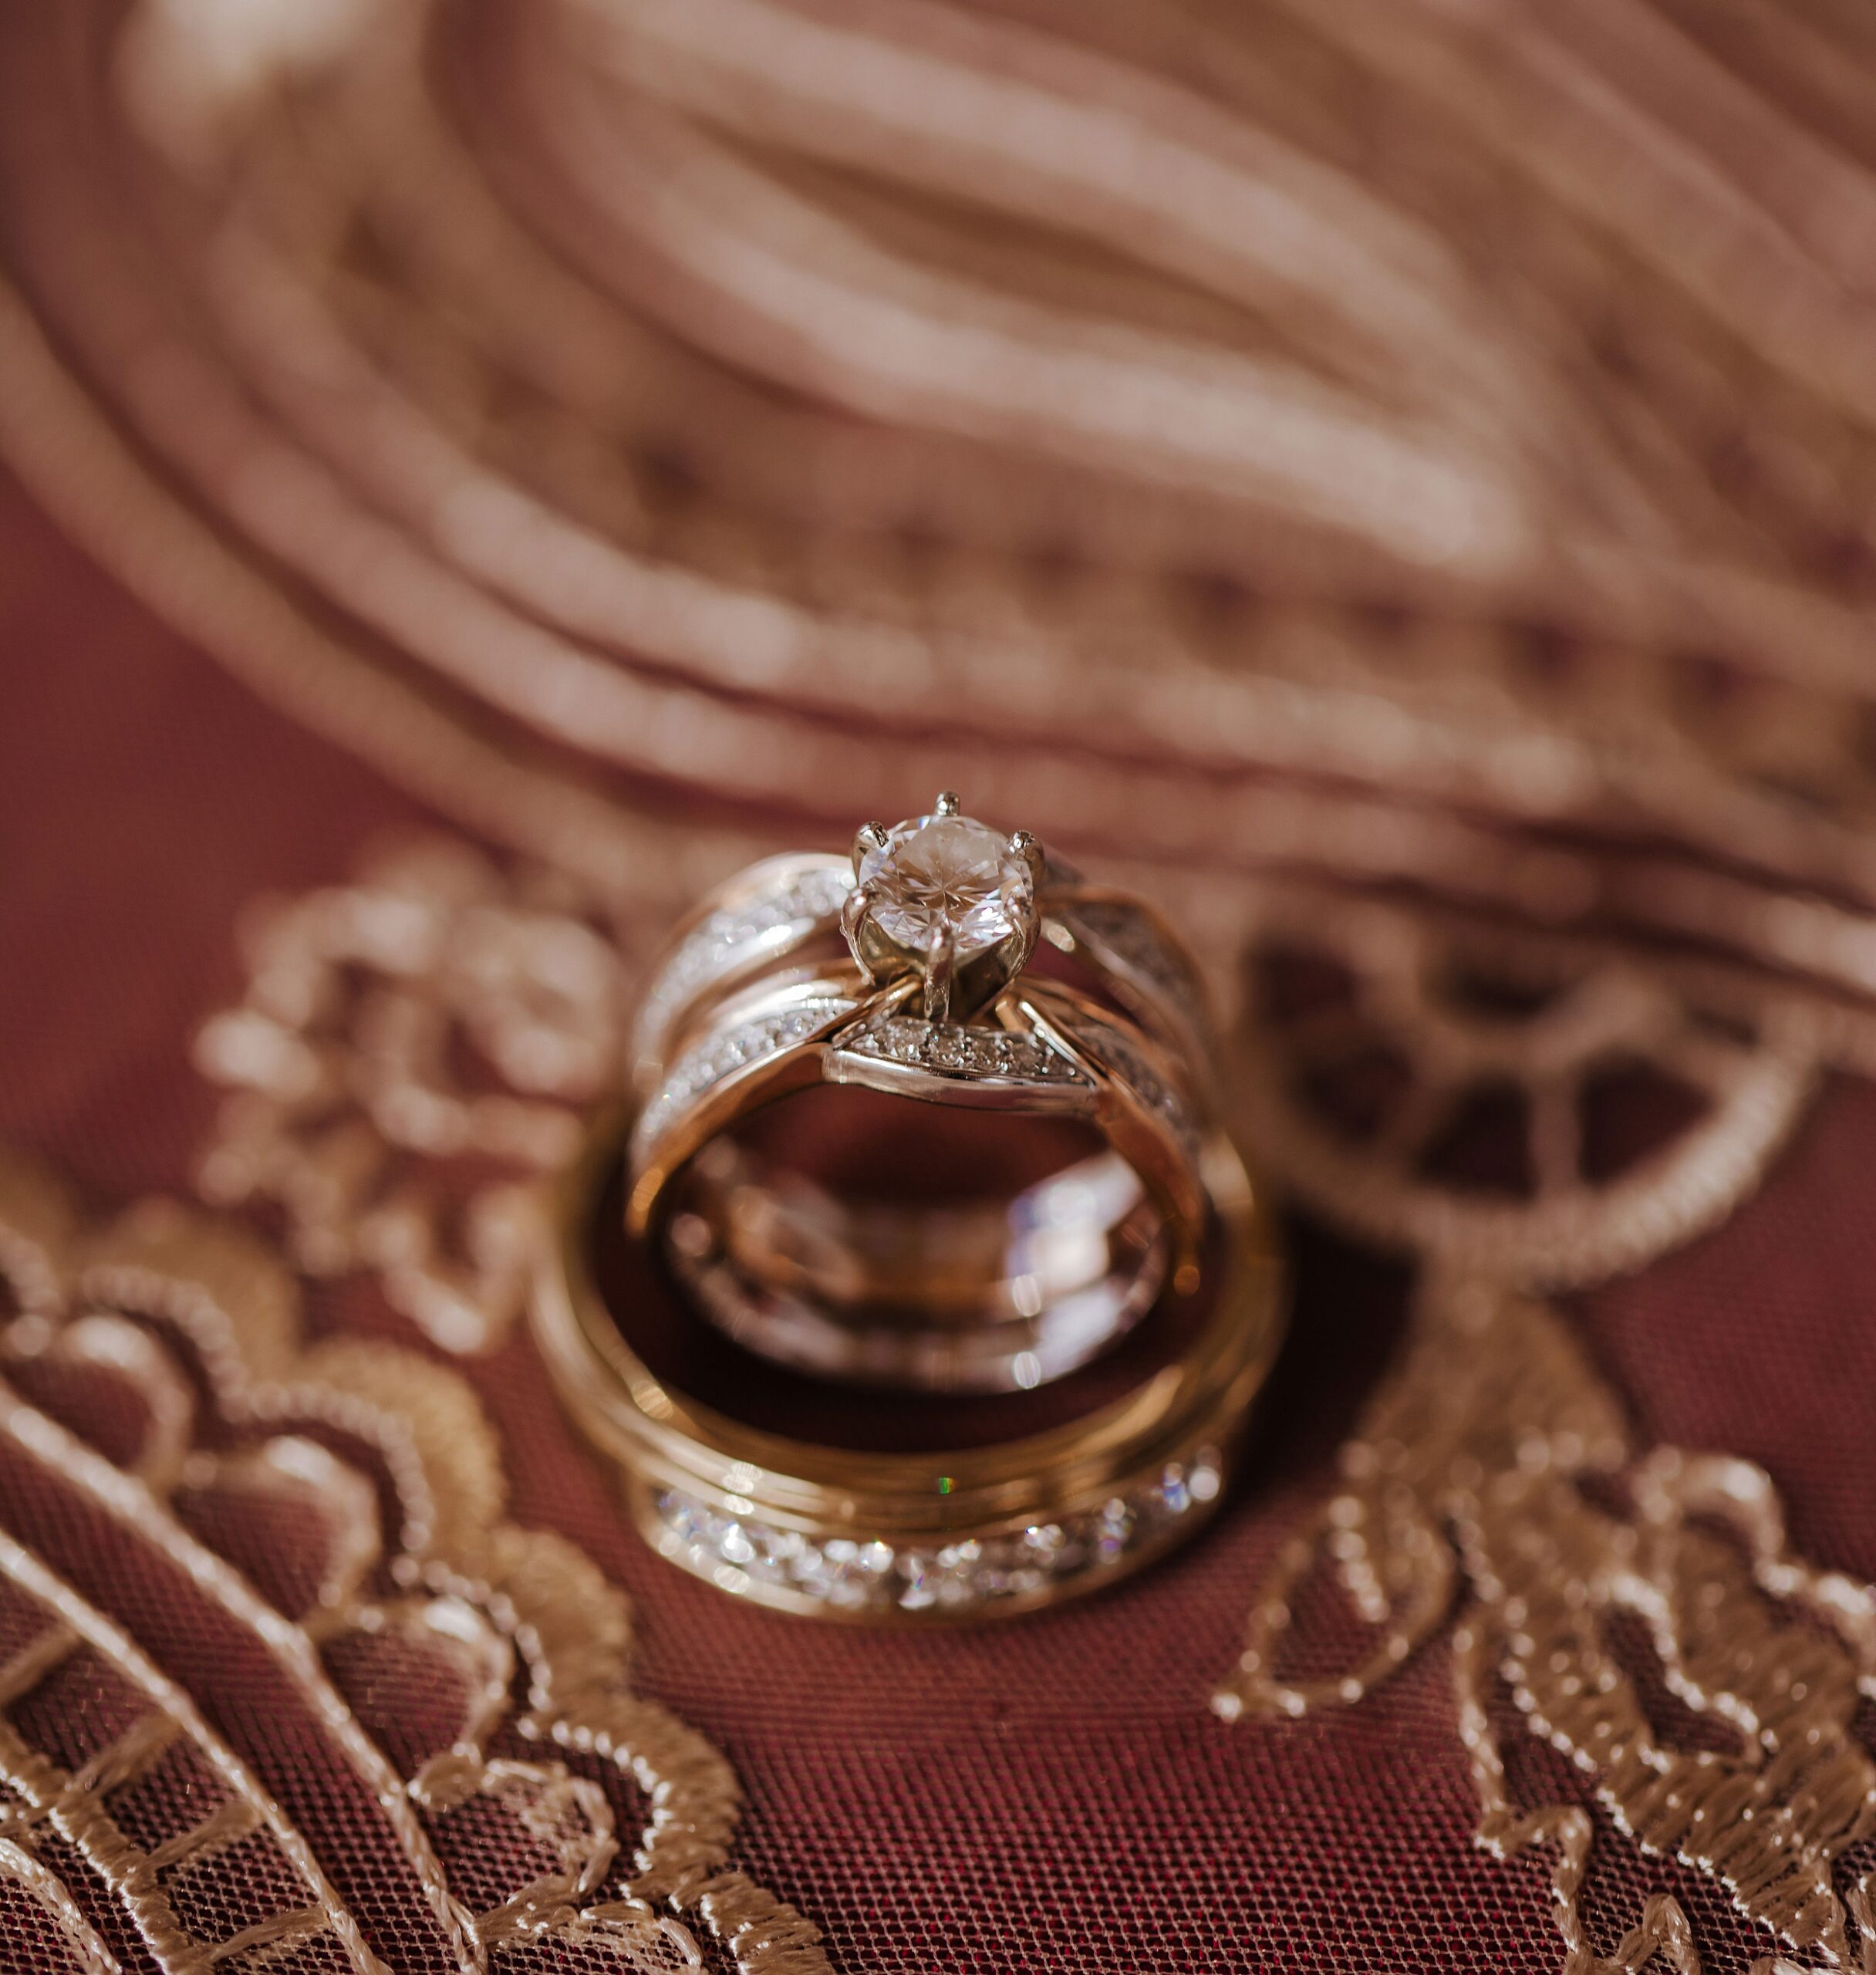 Details of wedding rings standing on a red and gold embroidered tablecloth